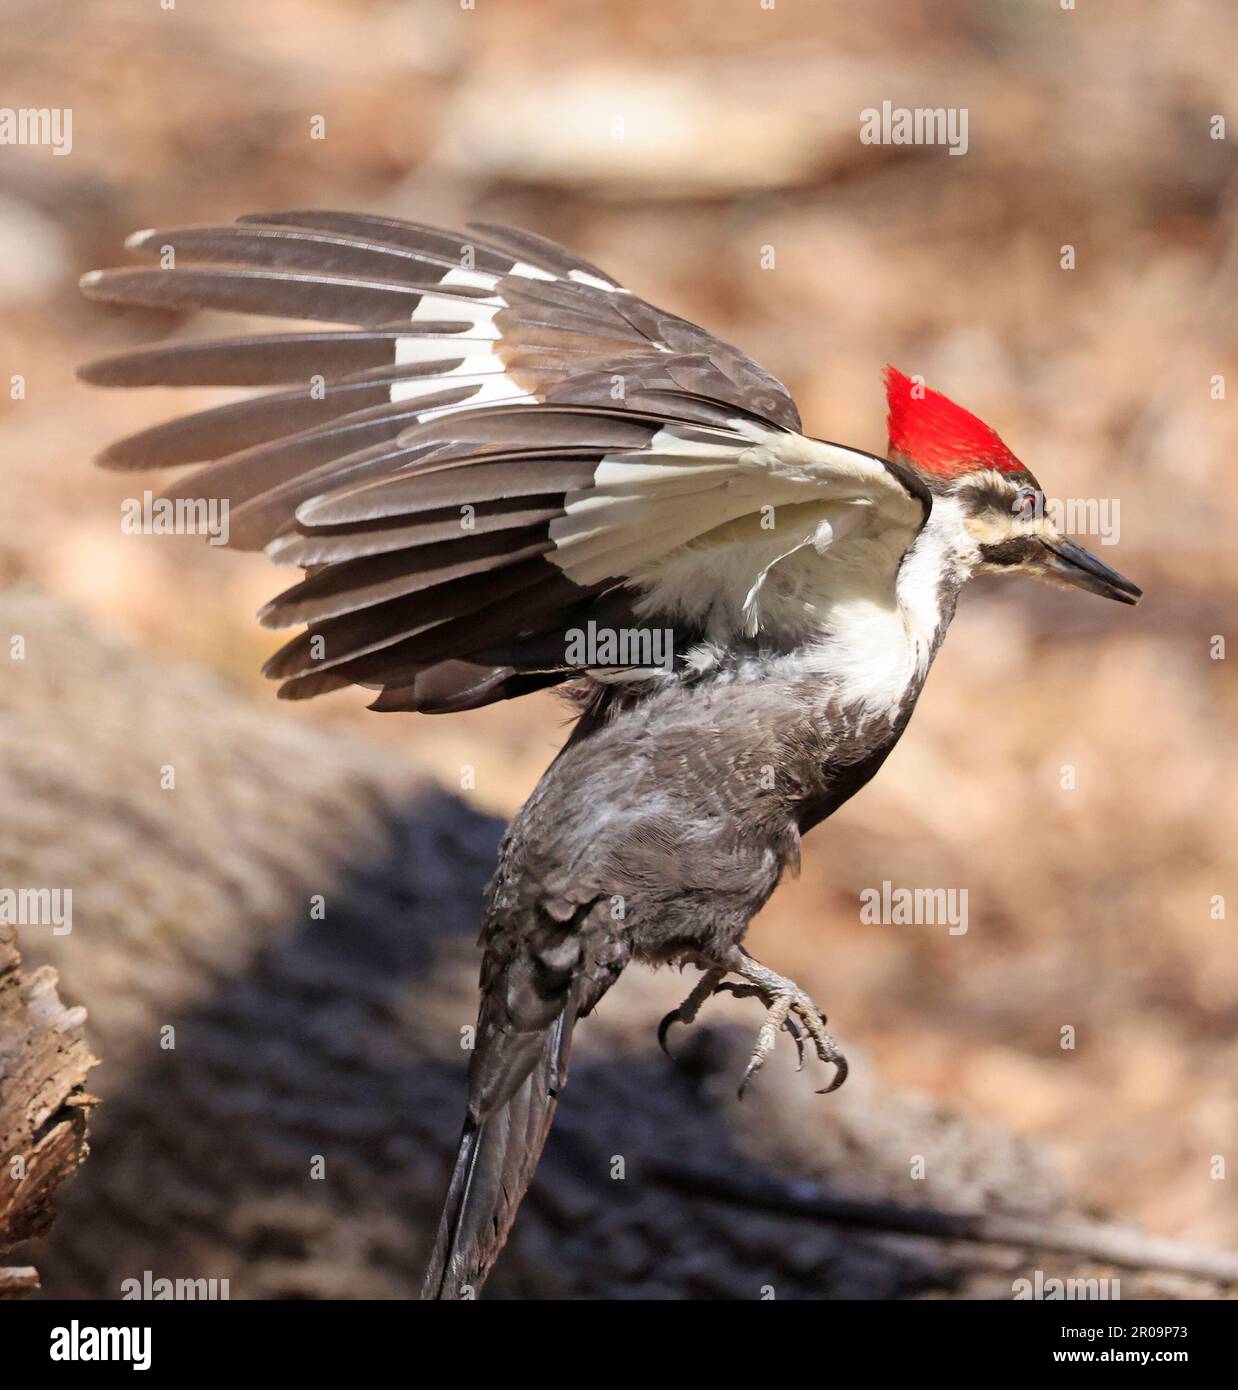 Pileated woodpecker portrait taking off from a tree trunk into the forest, Quebec, Canada Stock Photo